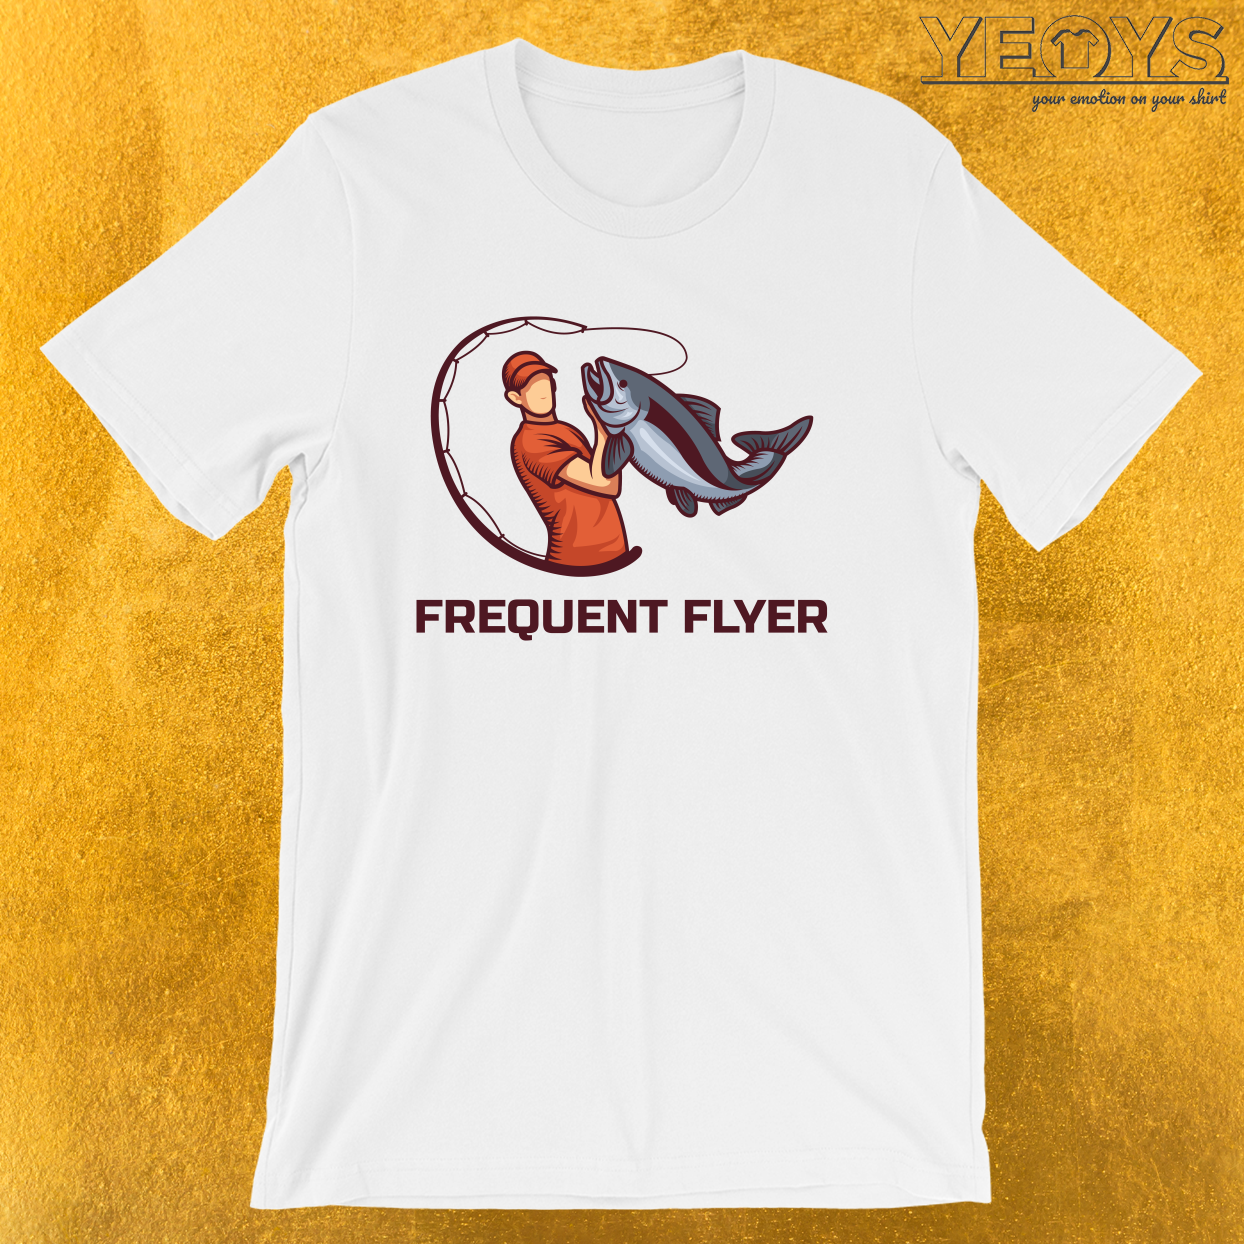 Frequent Flyer – Funny Fly Fishing Tee